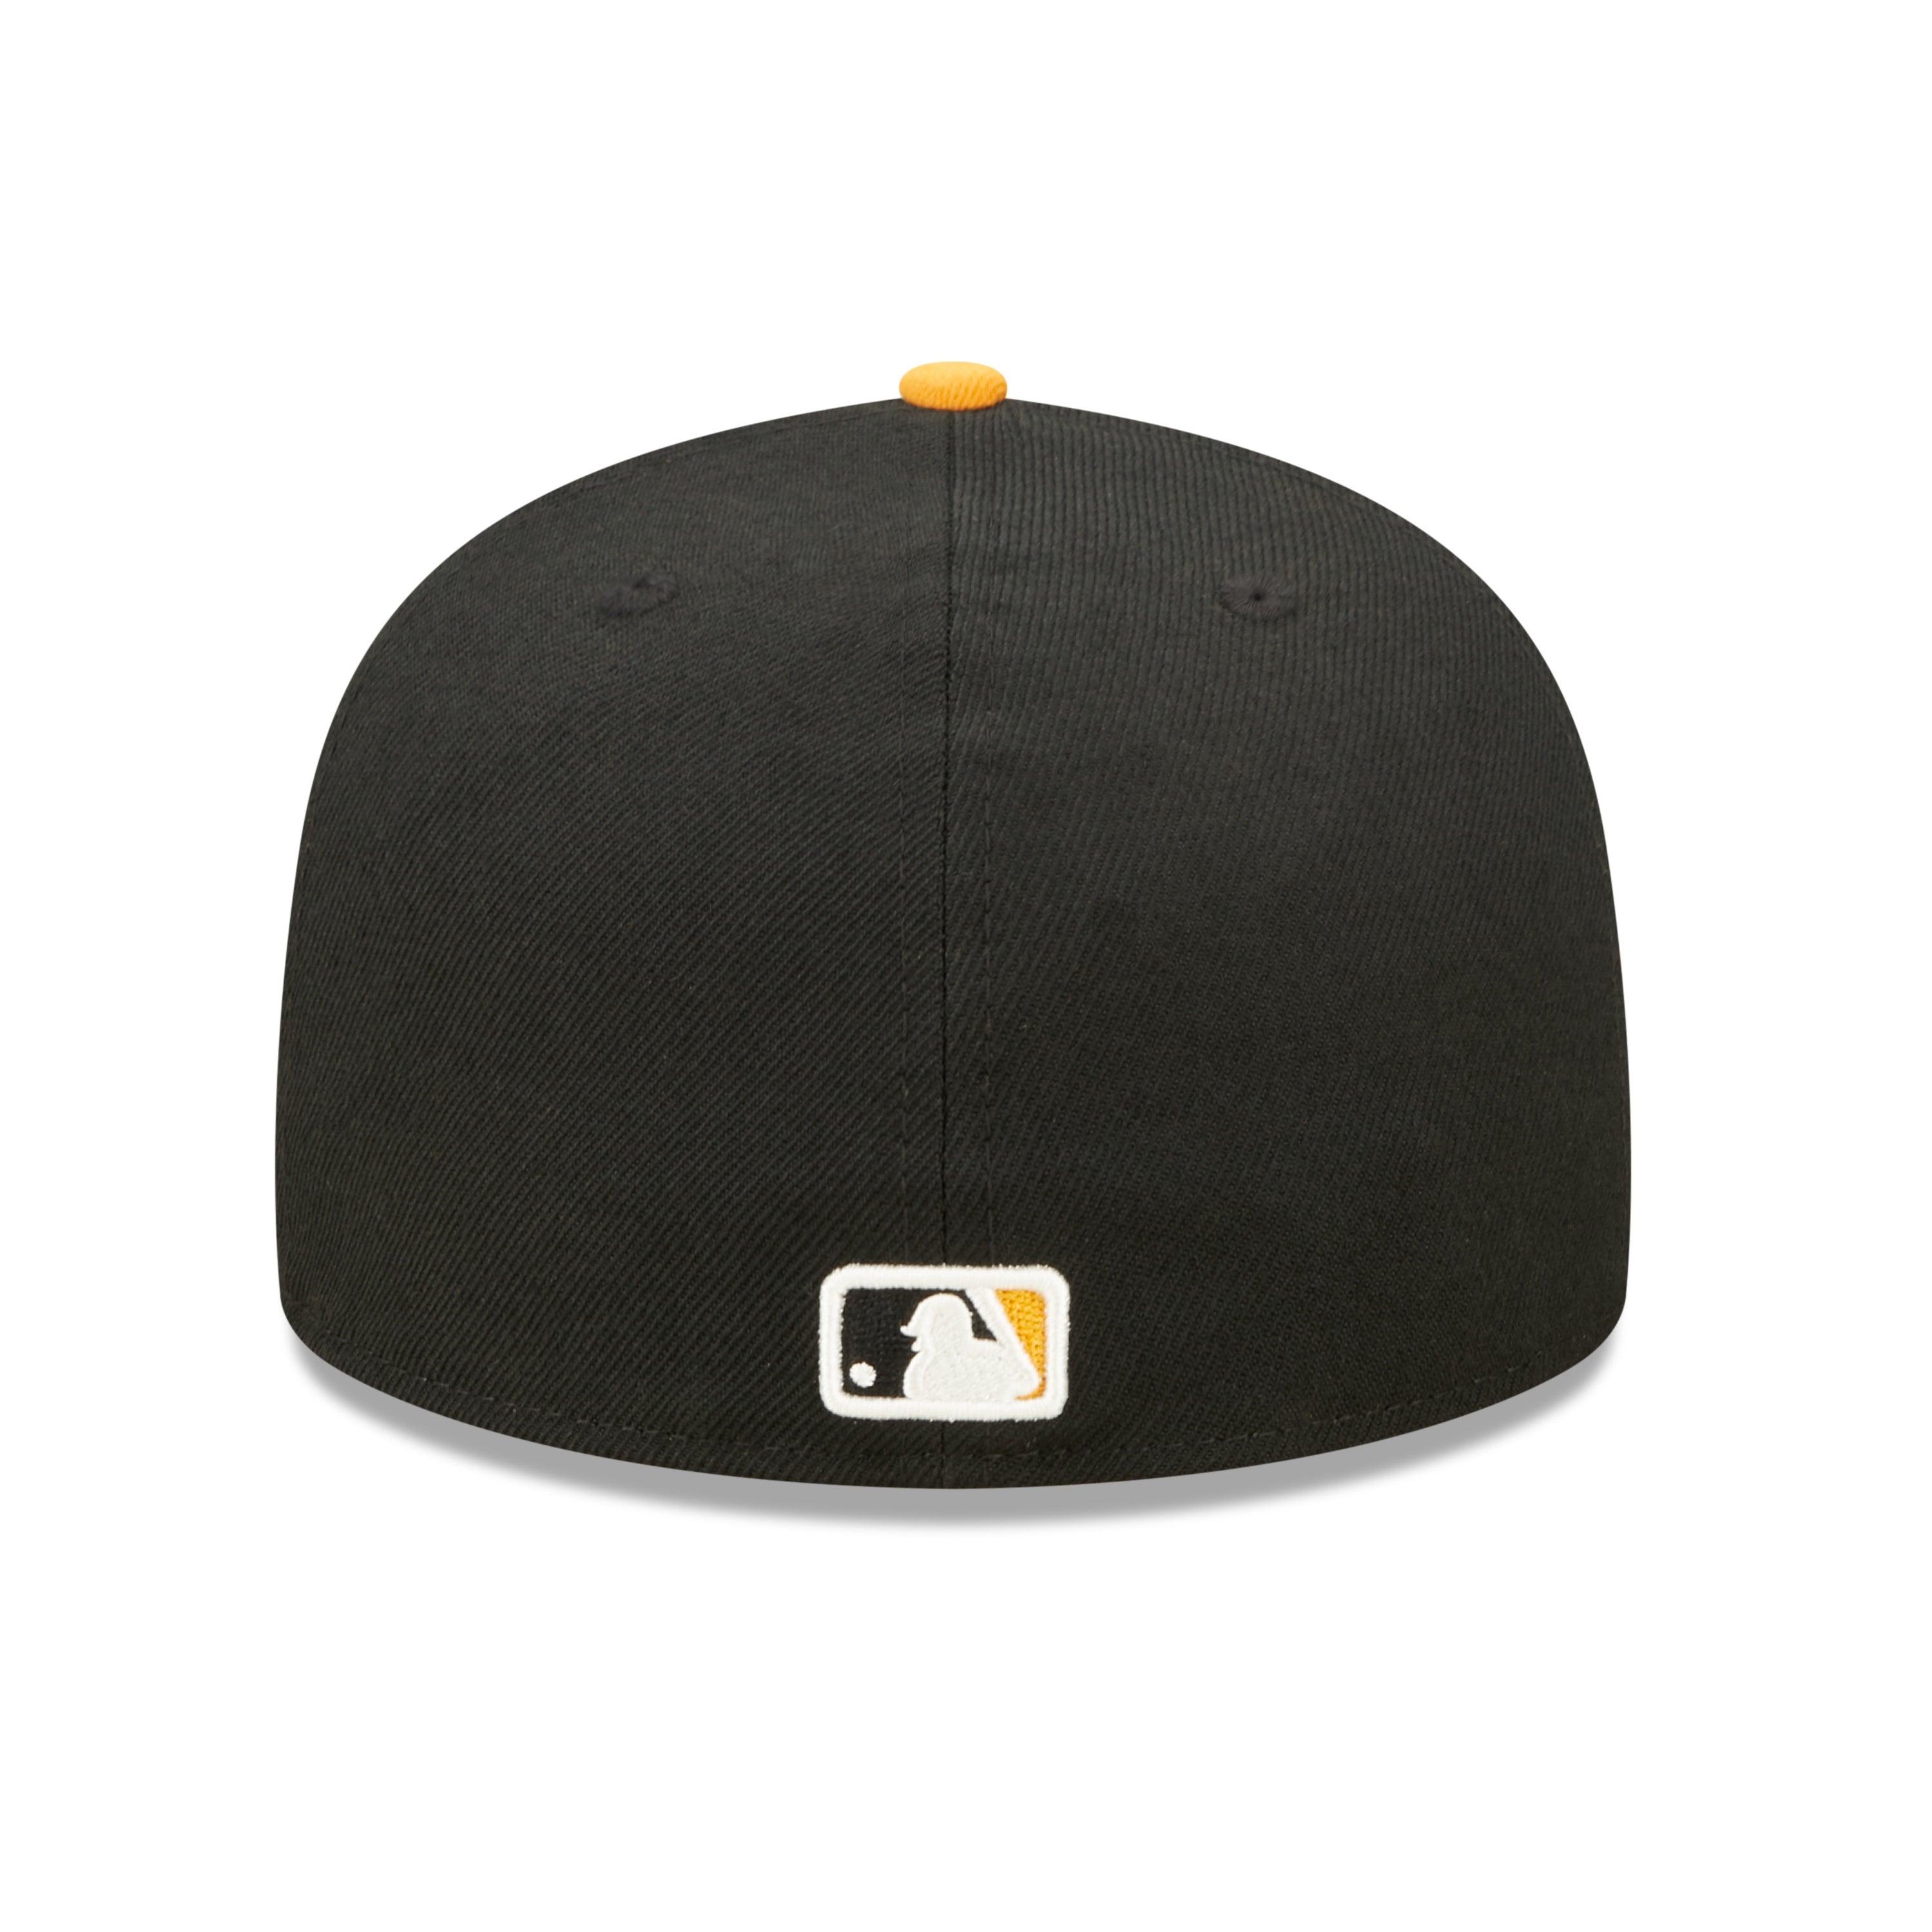 NEW ERA 59FIFTY WORLD SERIES 1976 MLB PITTSBURGH PIRATES TIGERFILL FITTED CAP - FAM